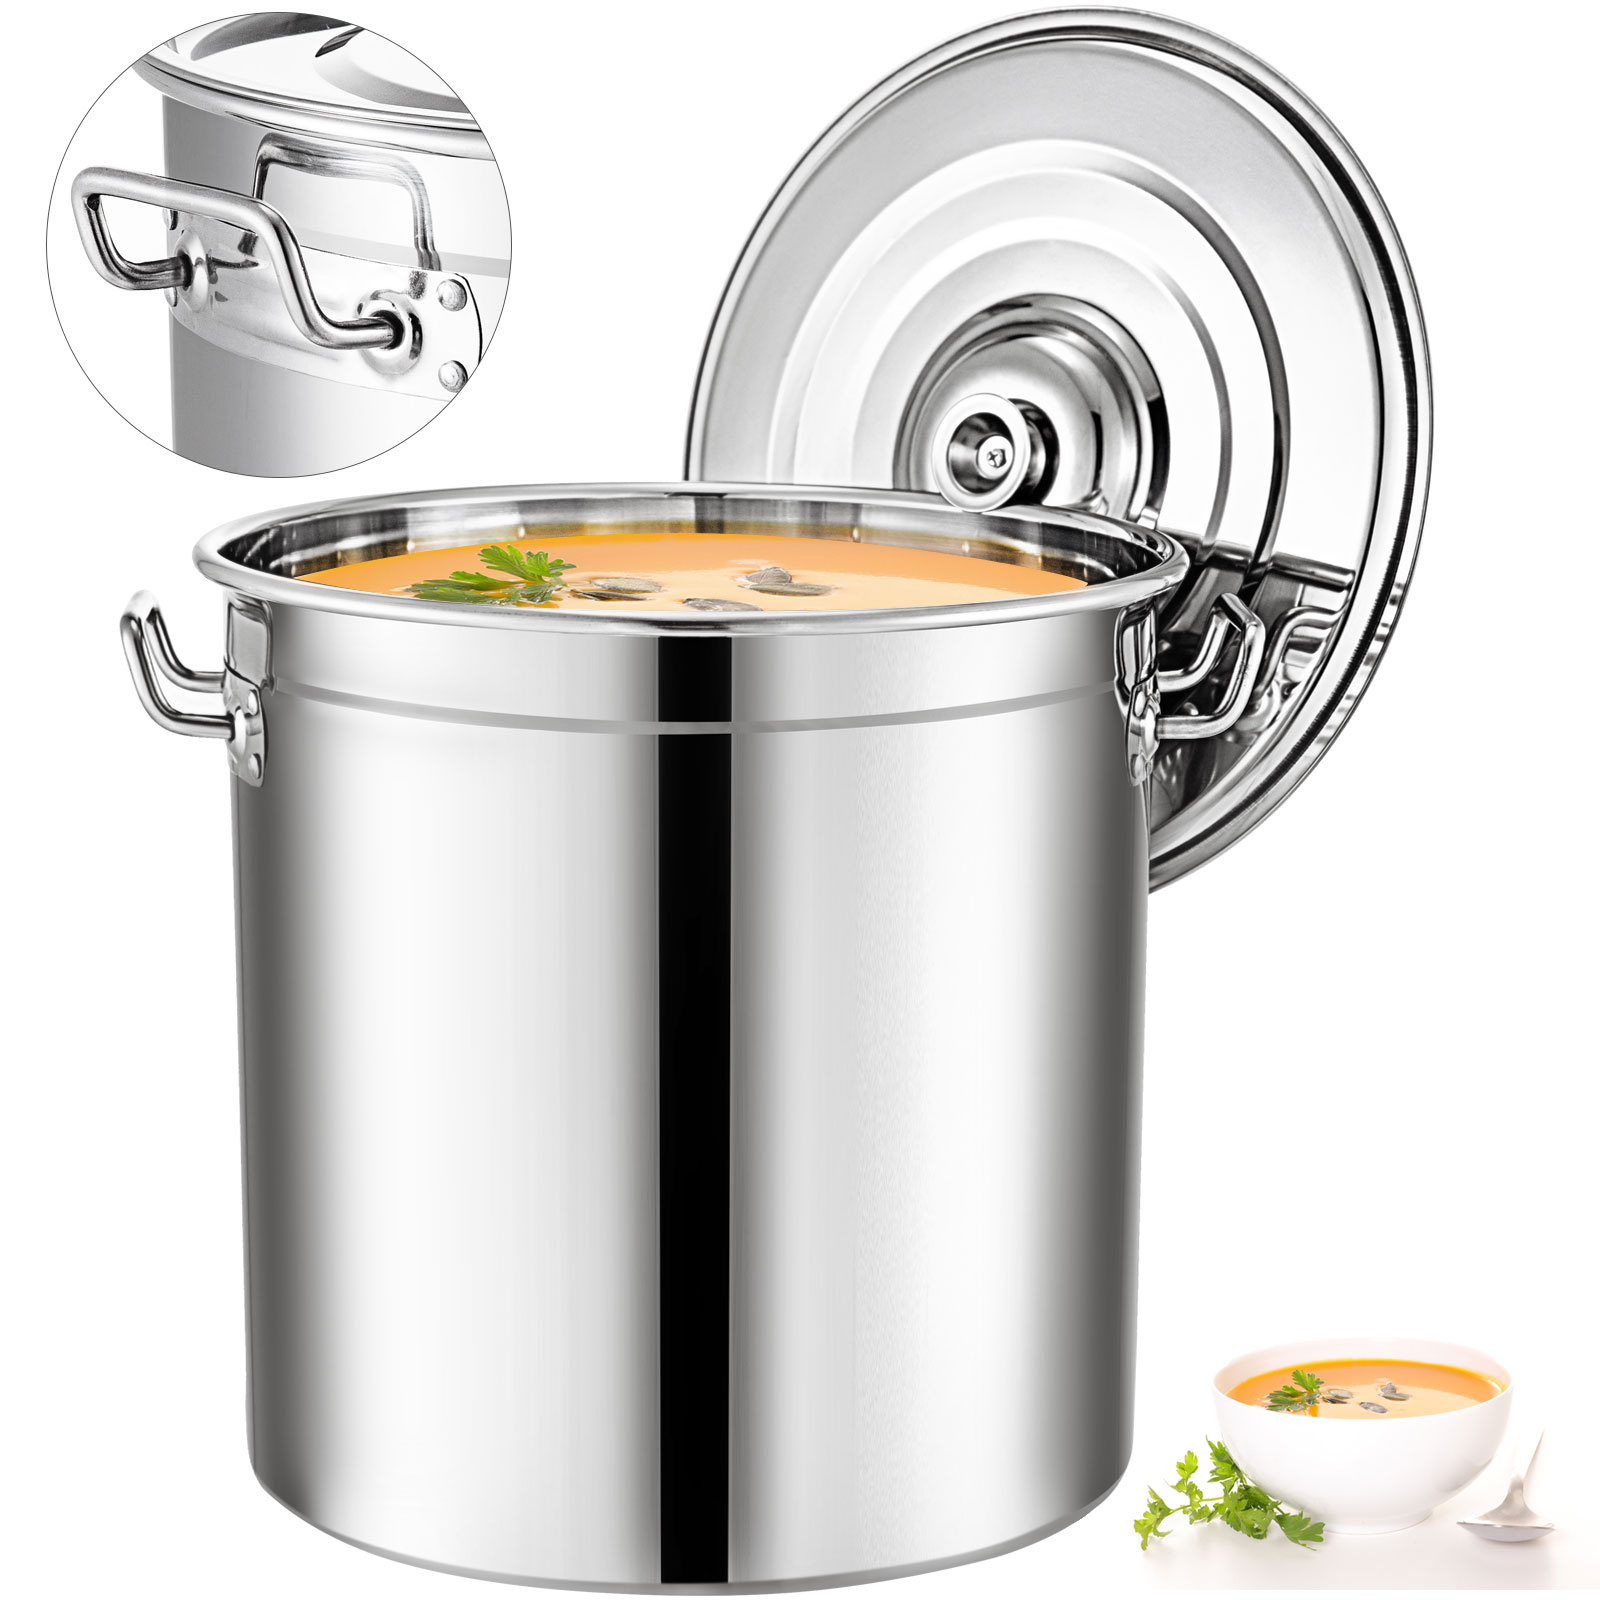 53-qt Polished Stainless Steel Stock Pot Brewing Kettle Mash Tun W/ Lid от Vevor Many GEOs